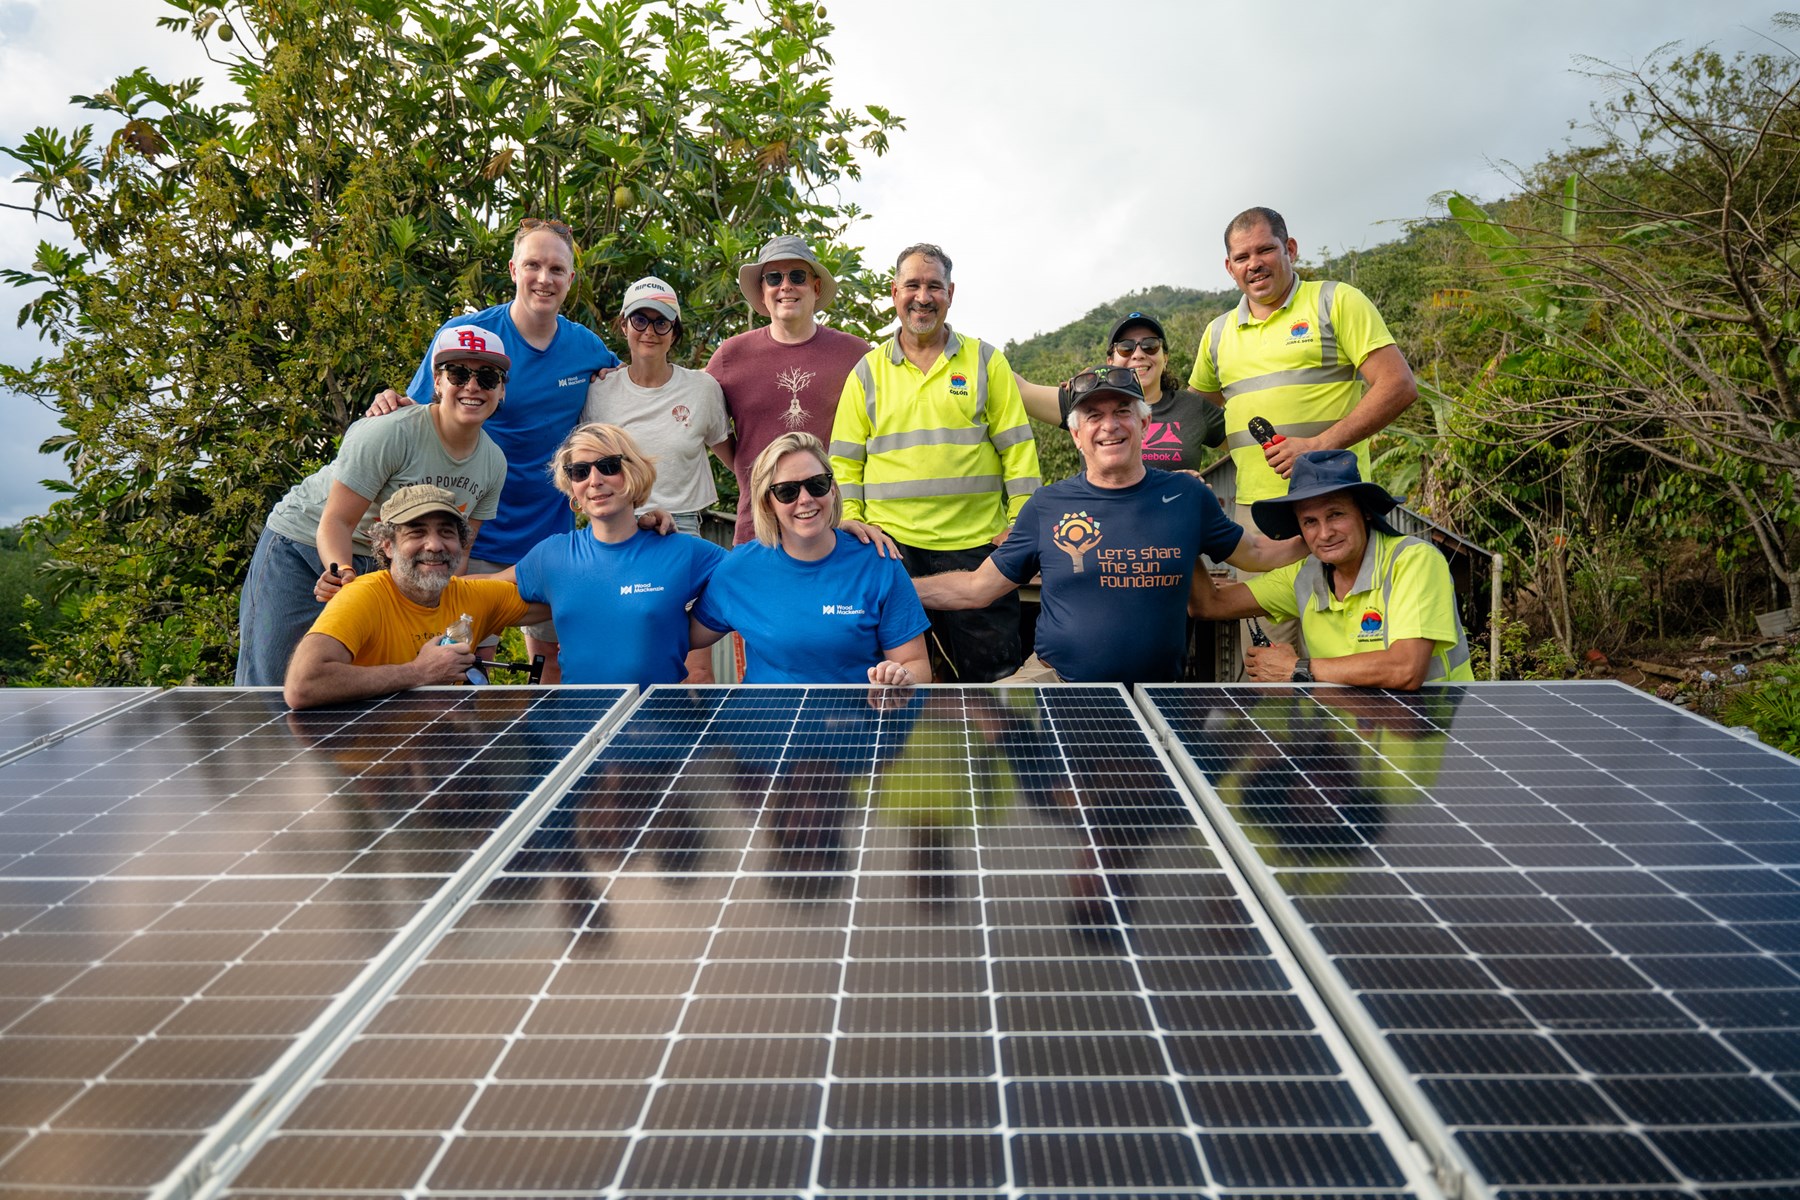 Pictured: Wood Mackenzie volunteers in central Puerto Rico through a partnership with Let’s Share the Sun